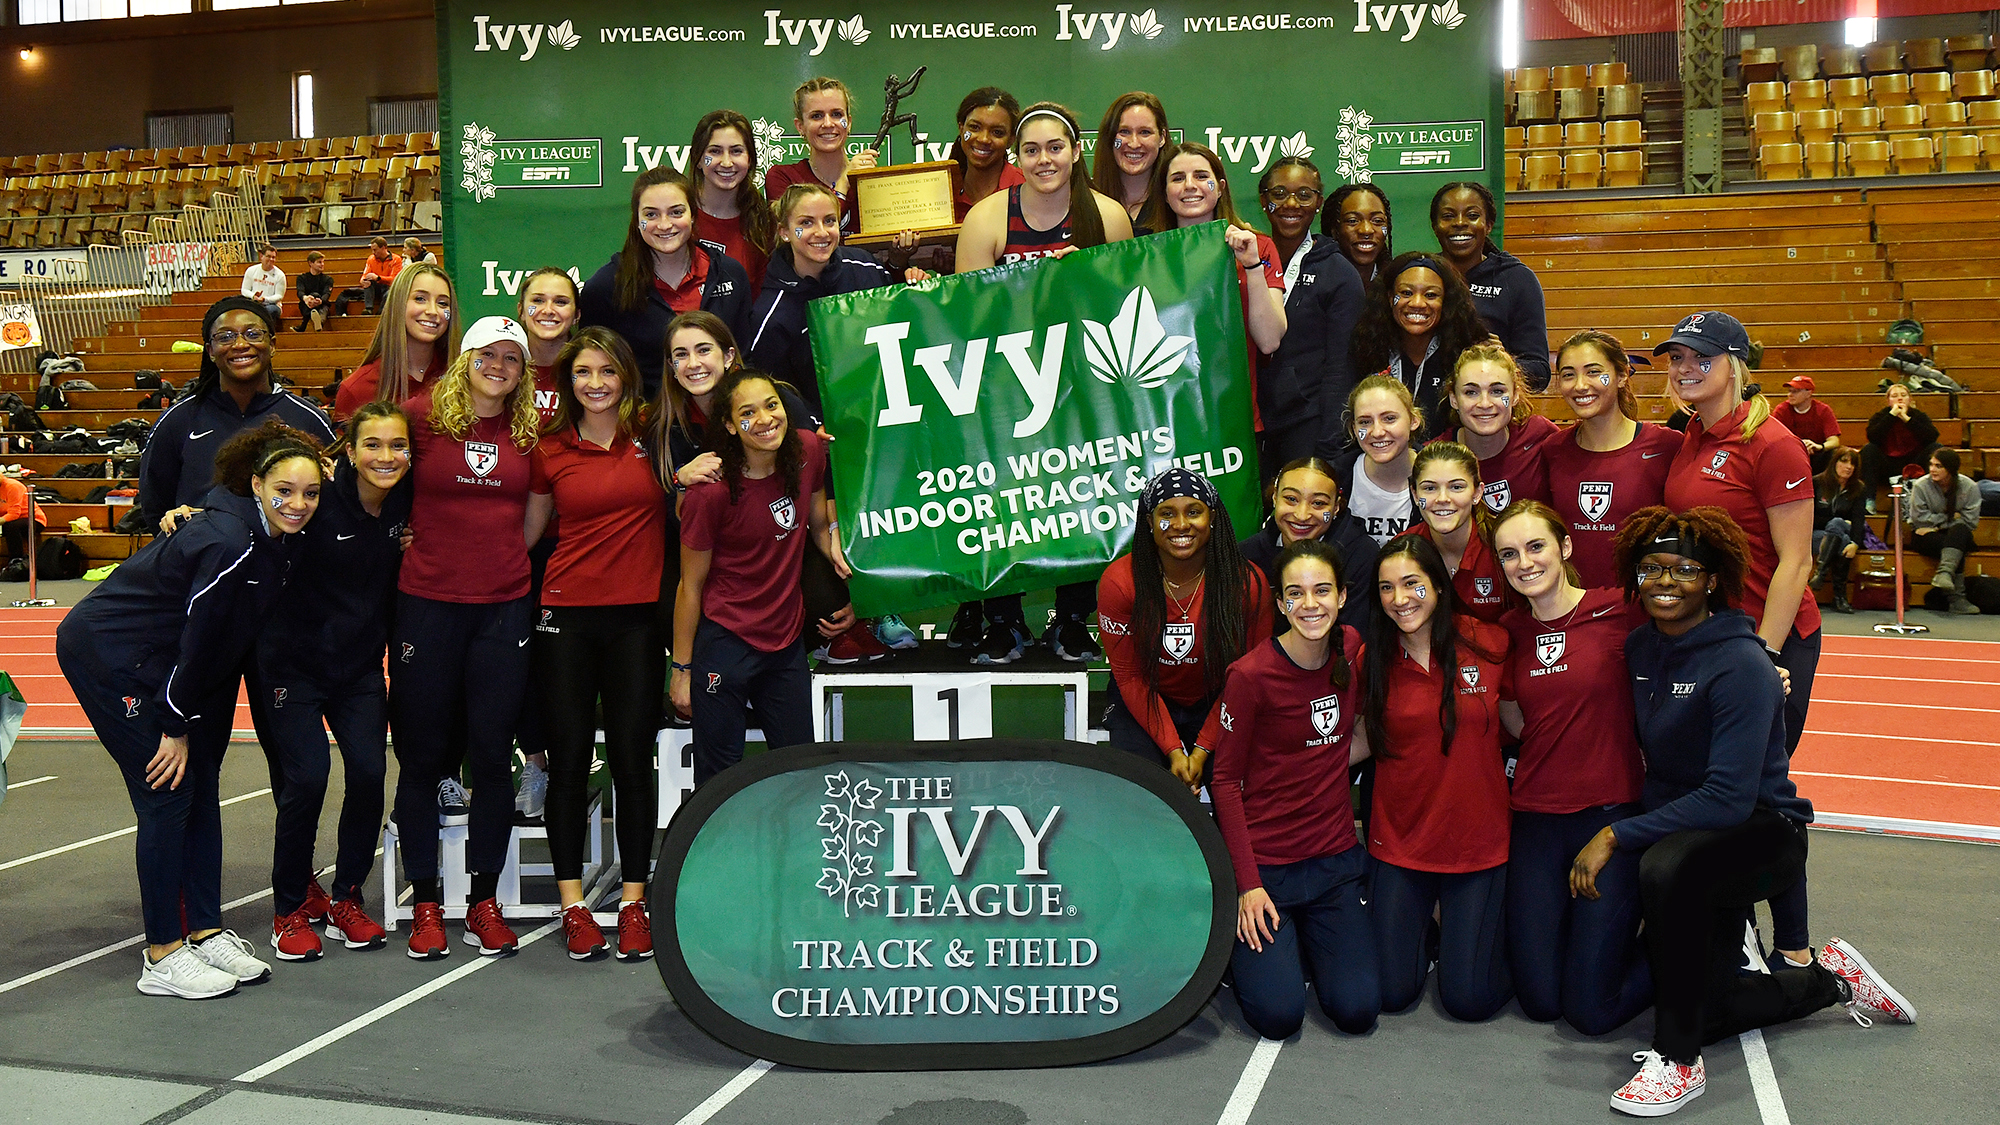 Members of the women's track and field team pose with a championship banner after winning the Indoor Ivy Heps.